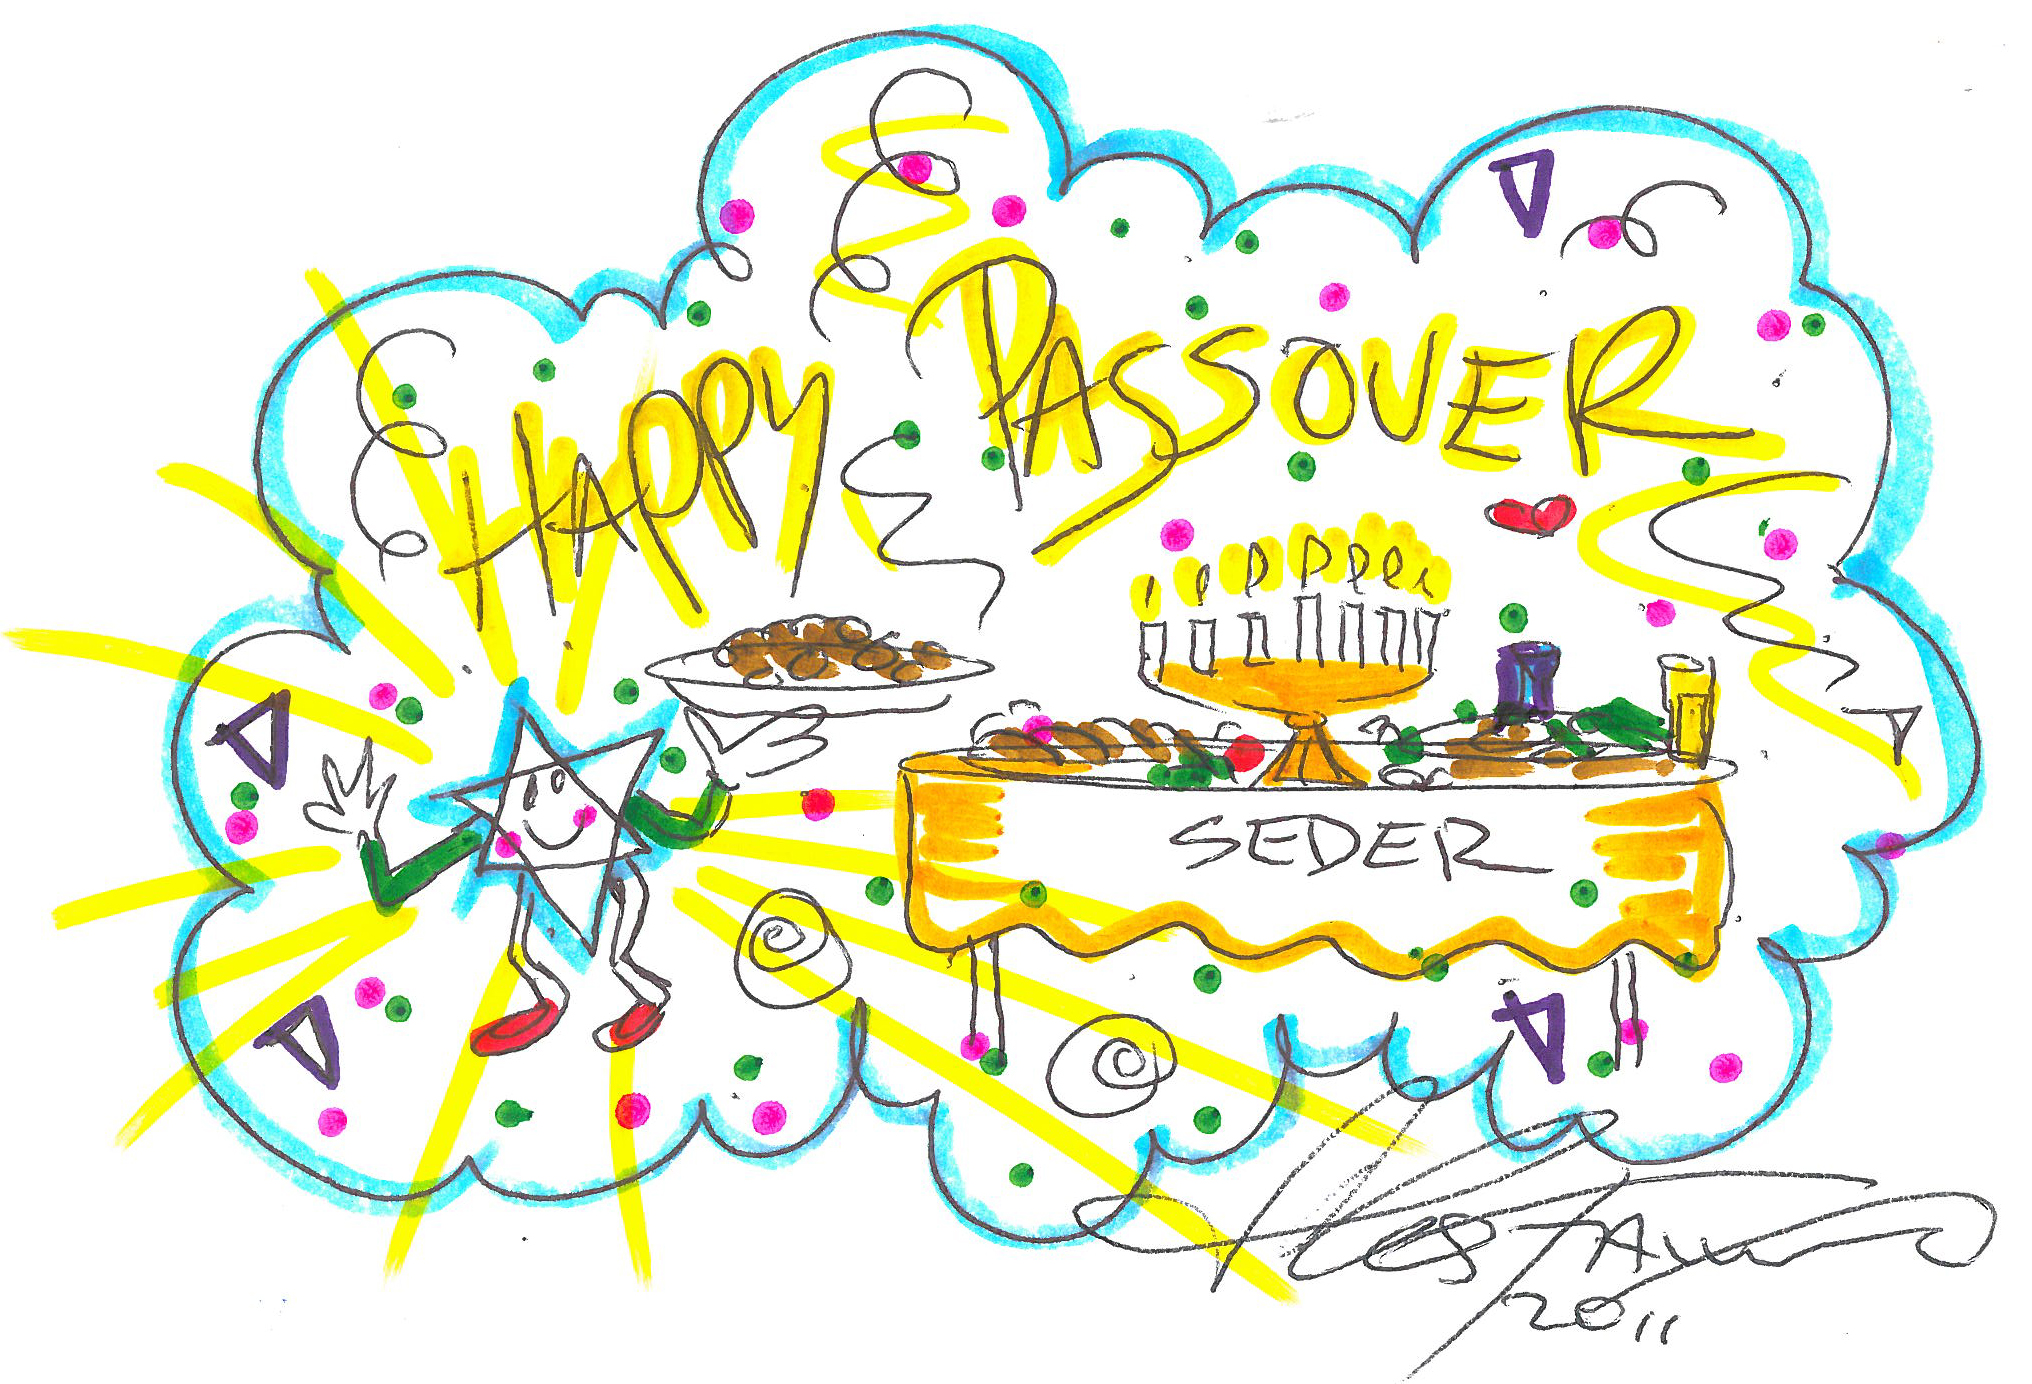 Charles-Fazzino-Wishes-Collectors-Happy-Passover